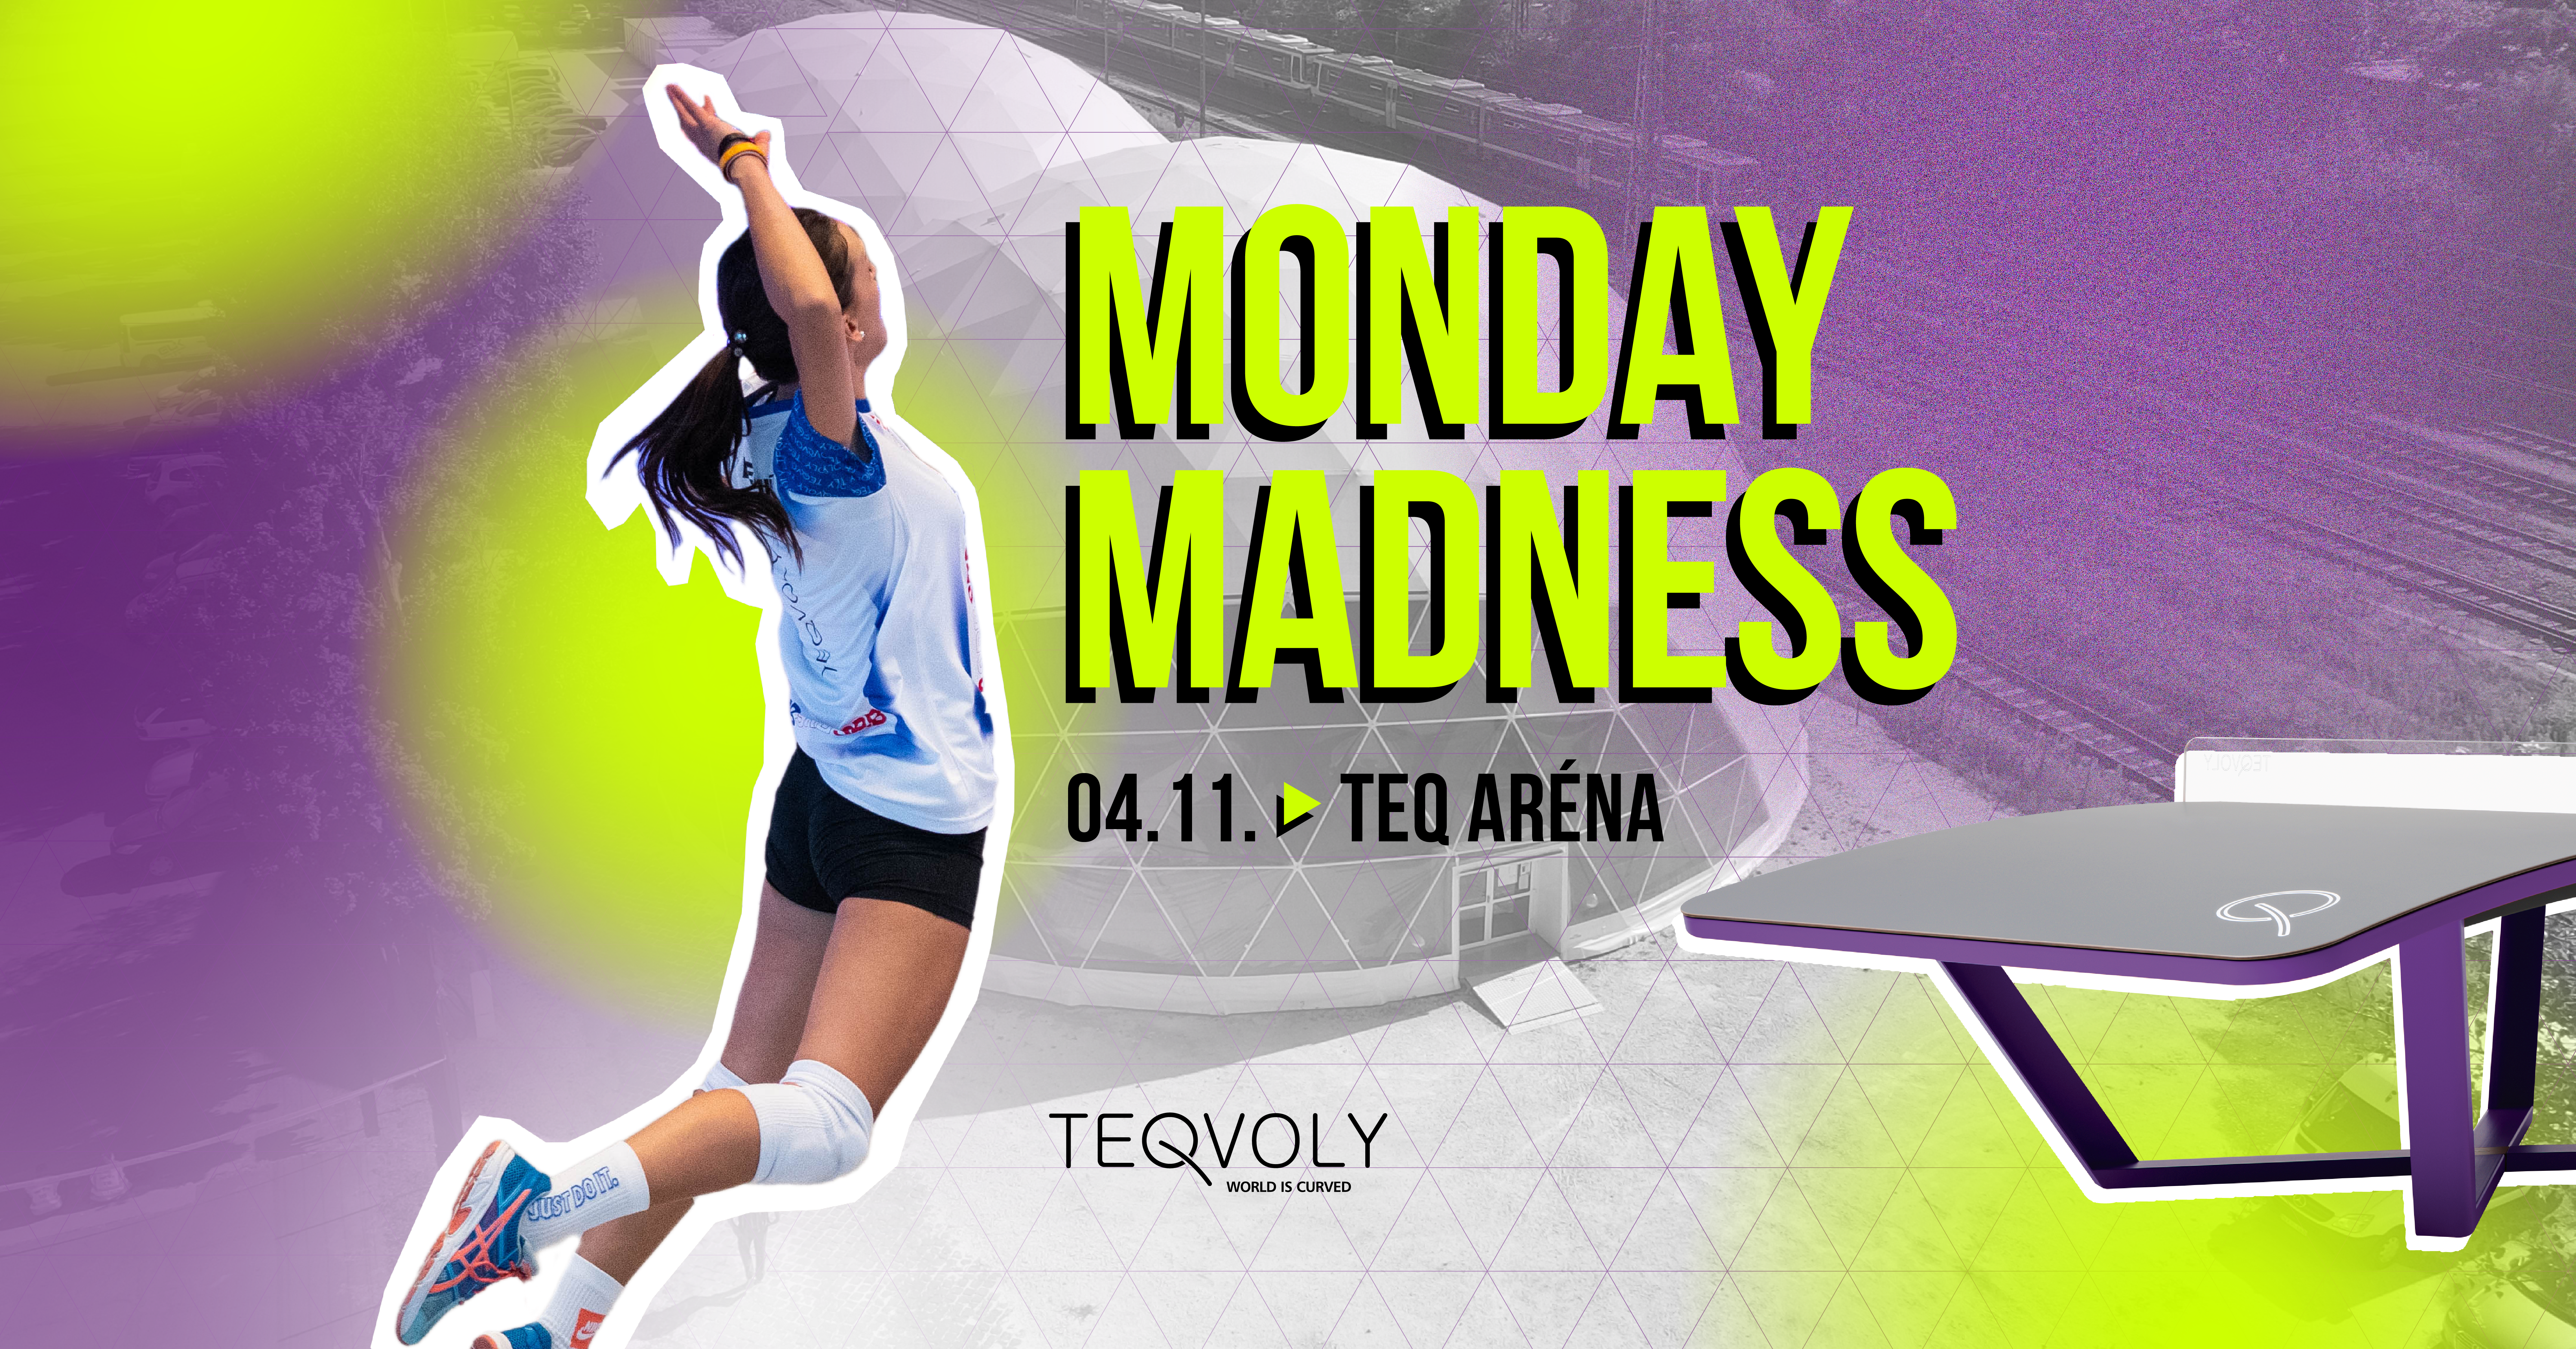 Come and play again at our Monday Madness event!